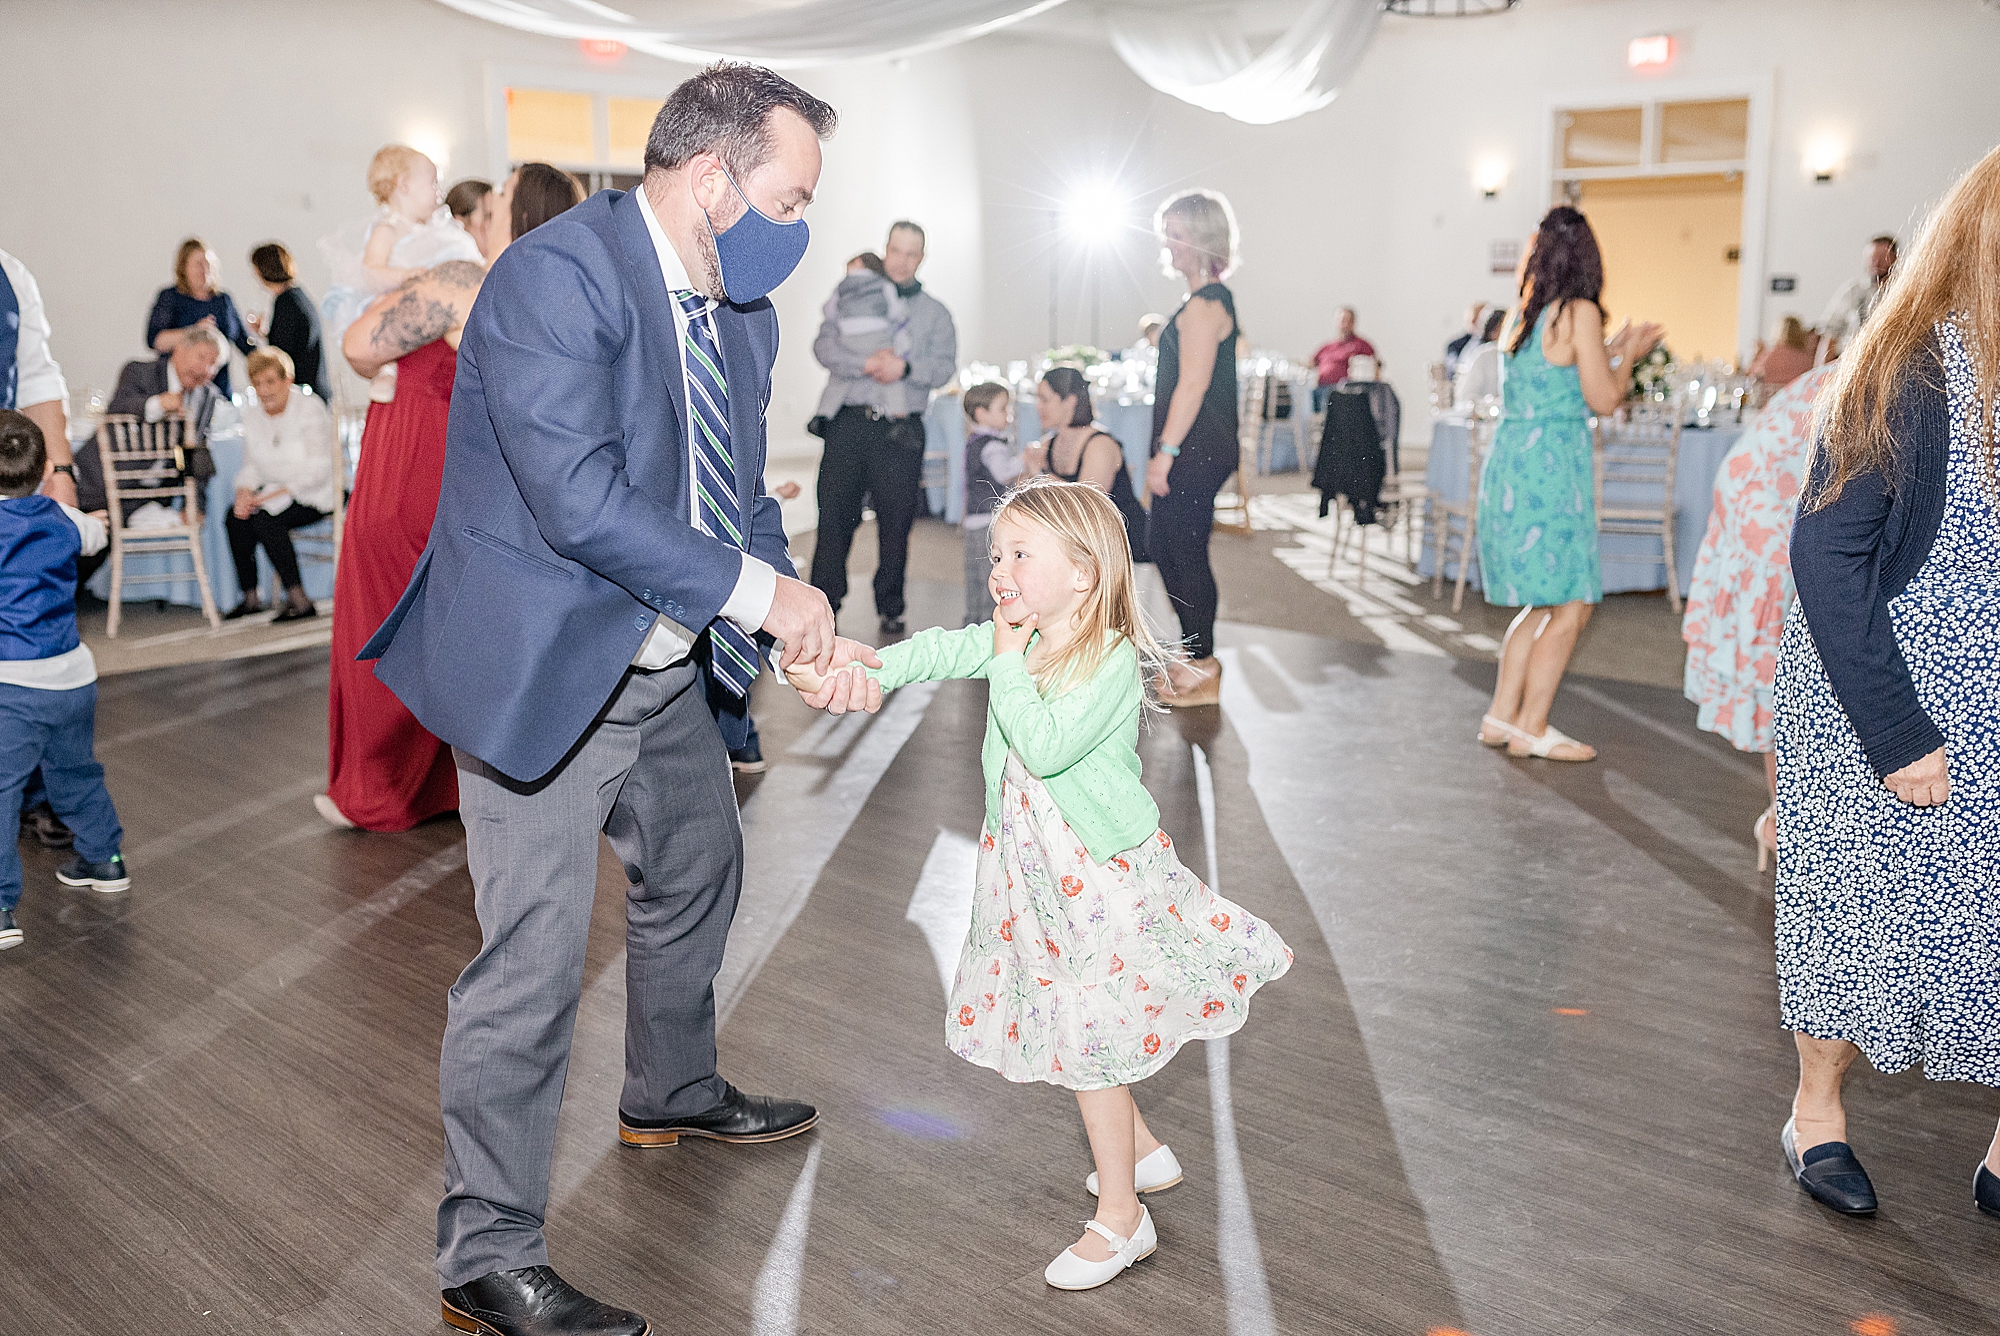 guests dance during Ohio wedding reception